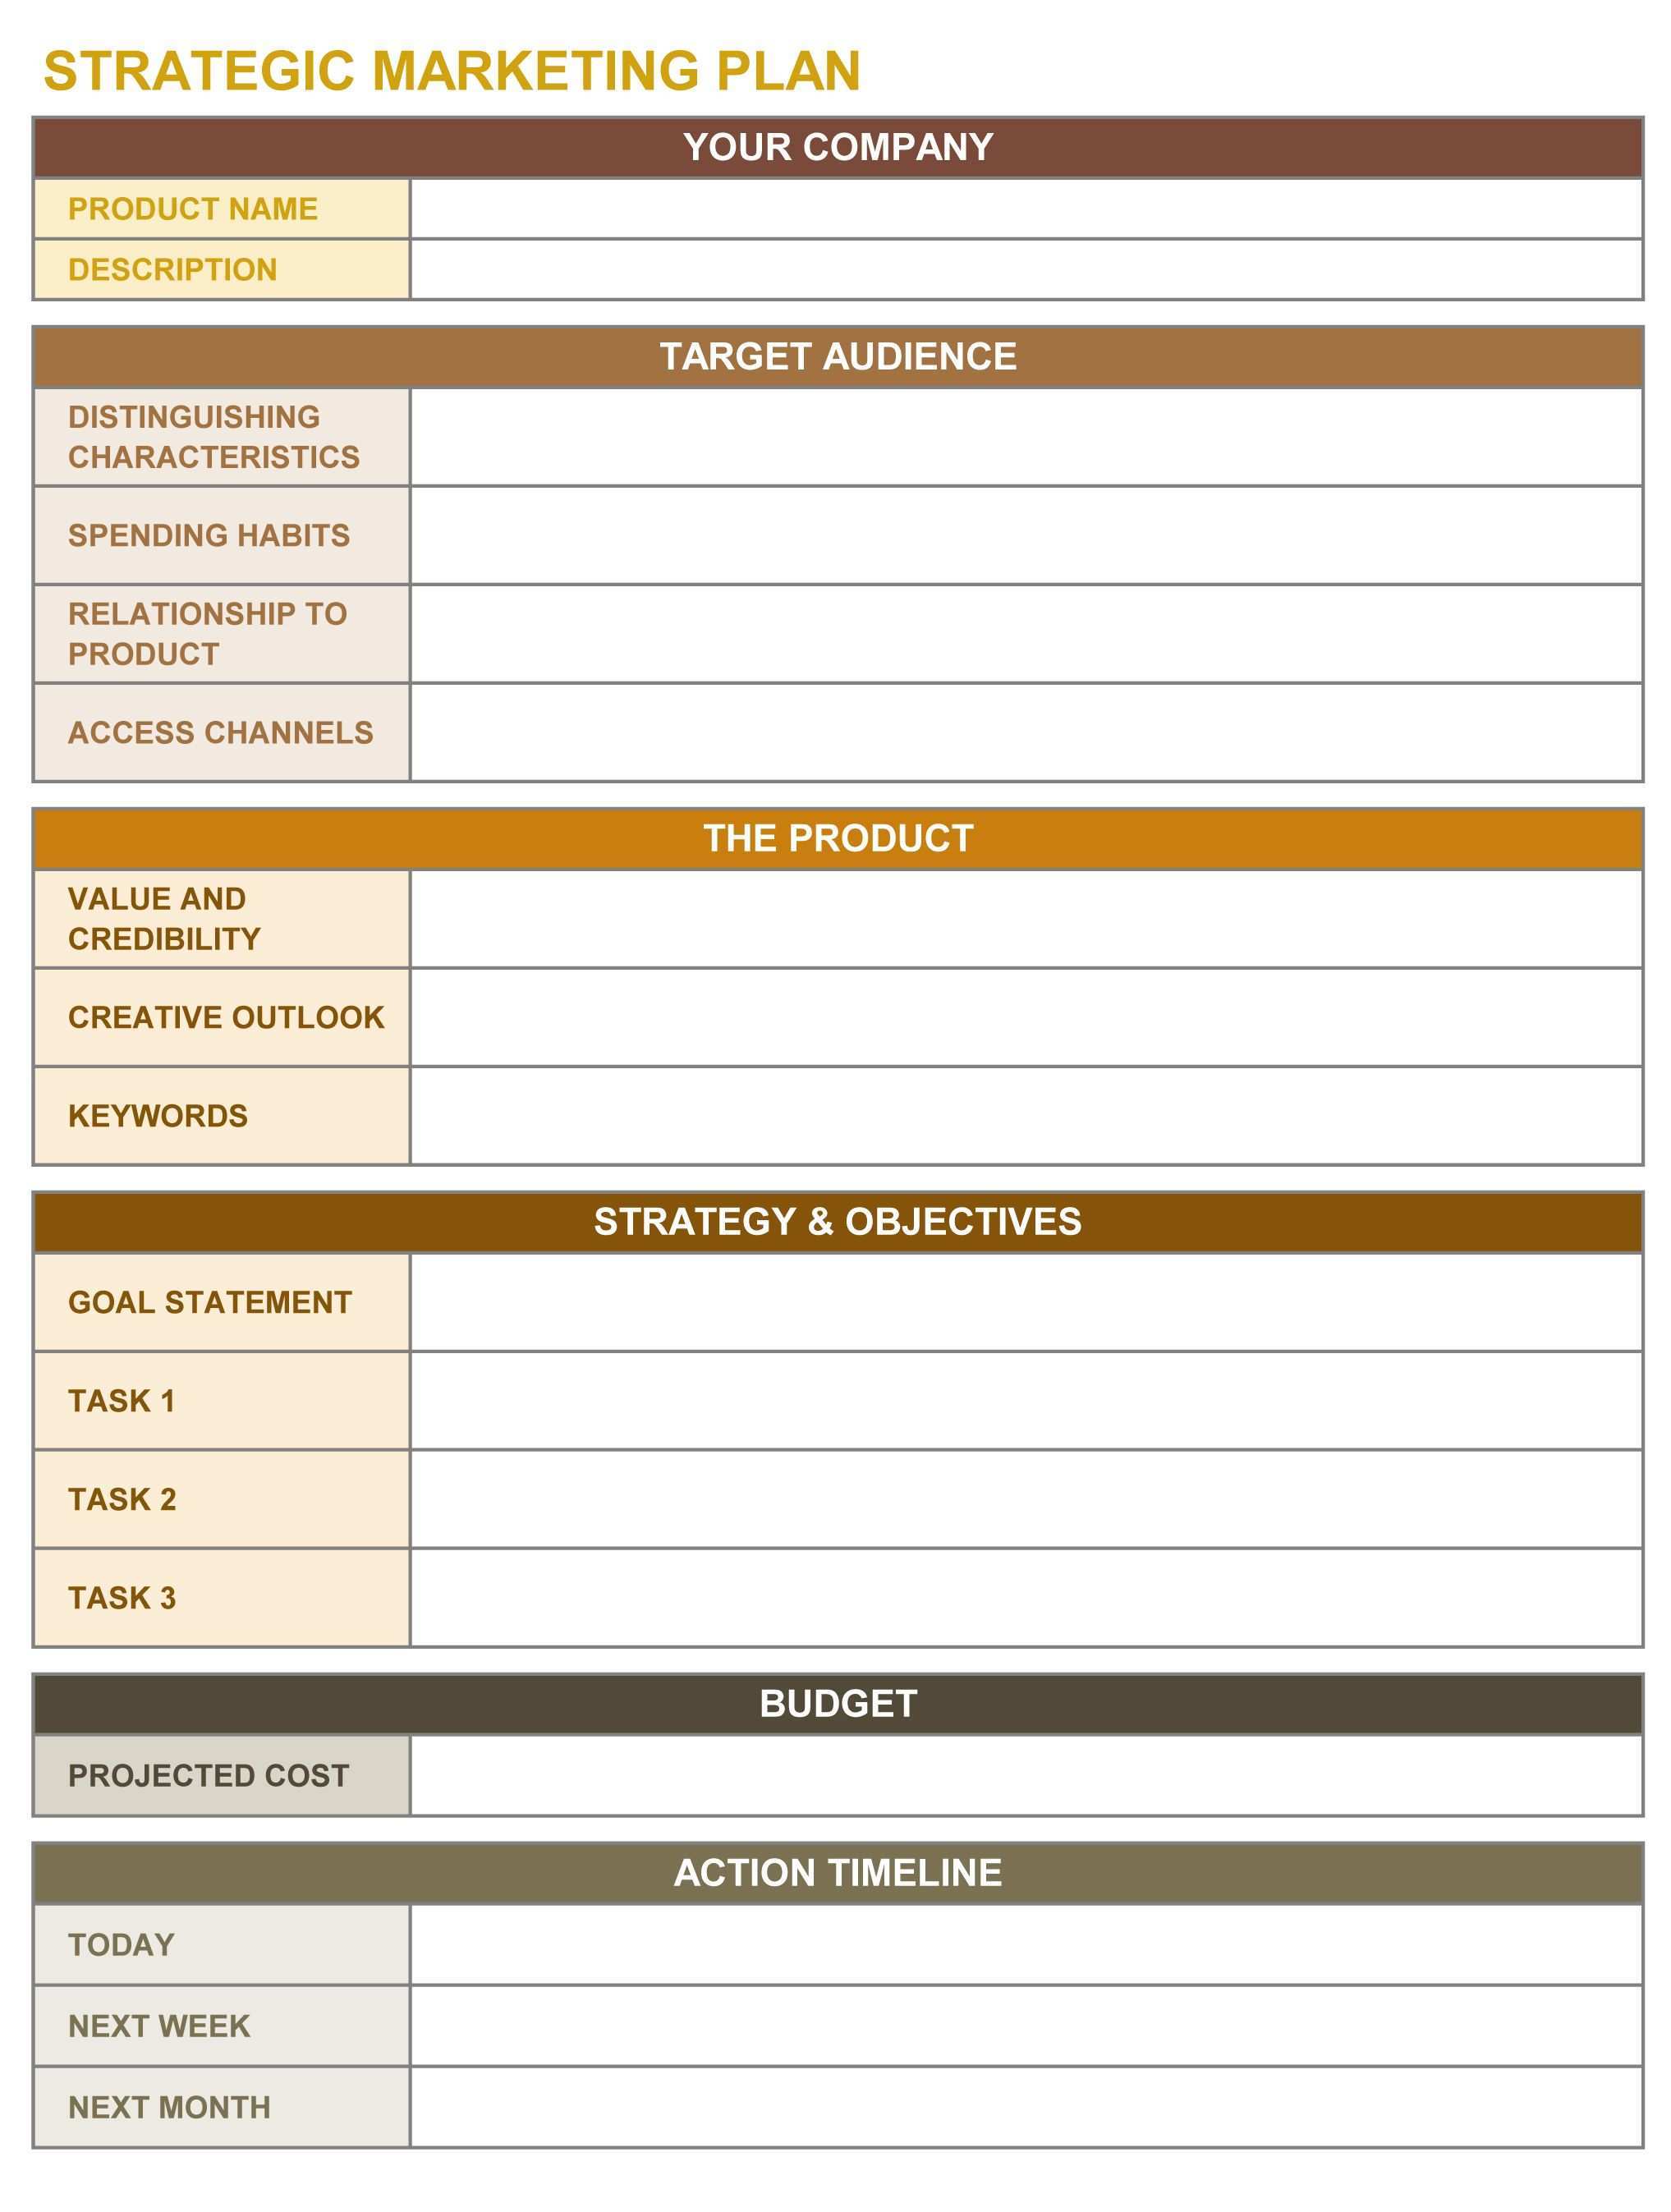 Strategic Marketing Plan Excel Template Strategic Planning Template Strategic Marketing Plan Marketing Strategy Template